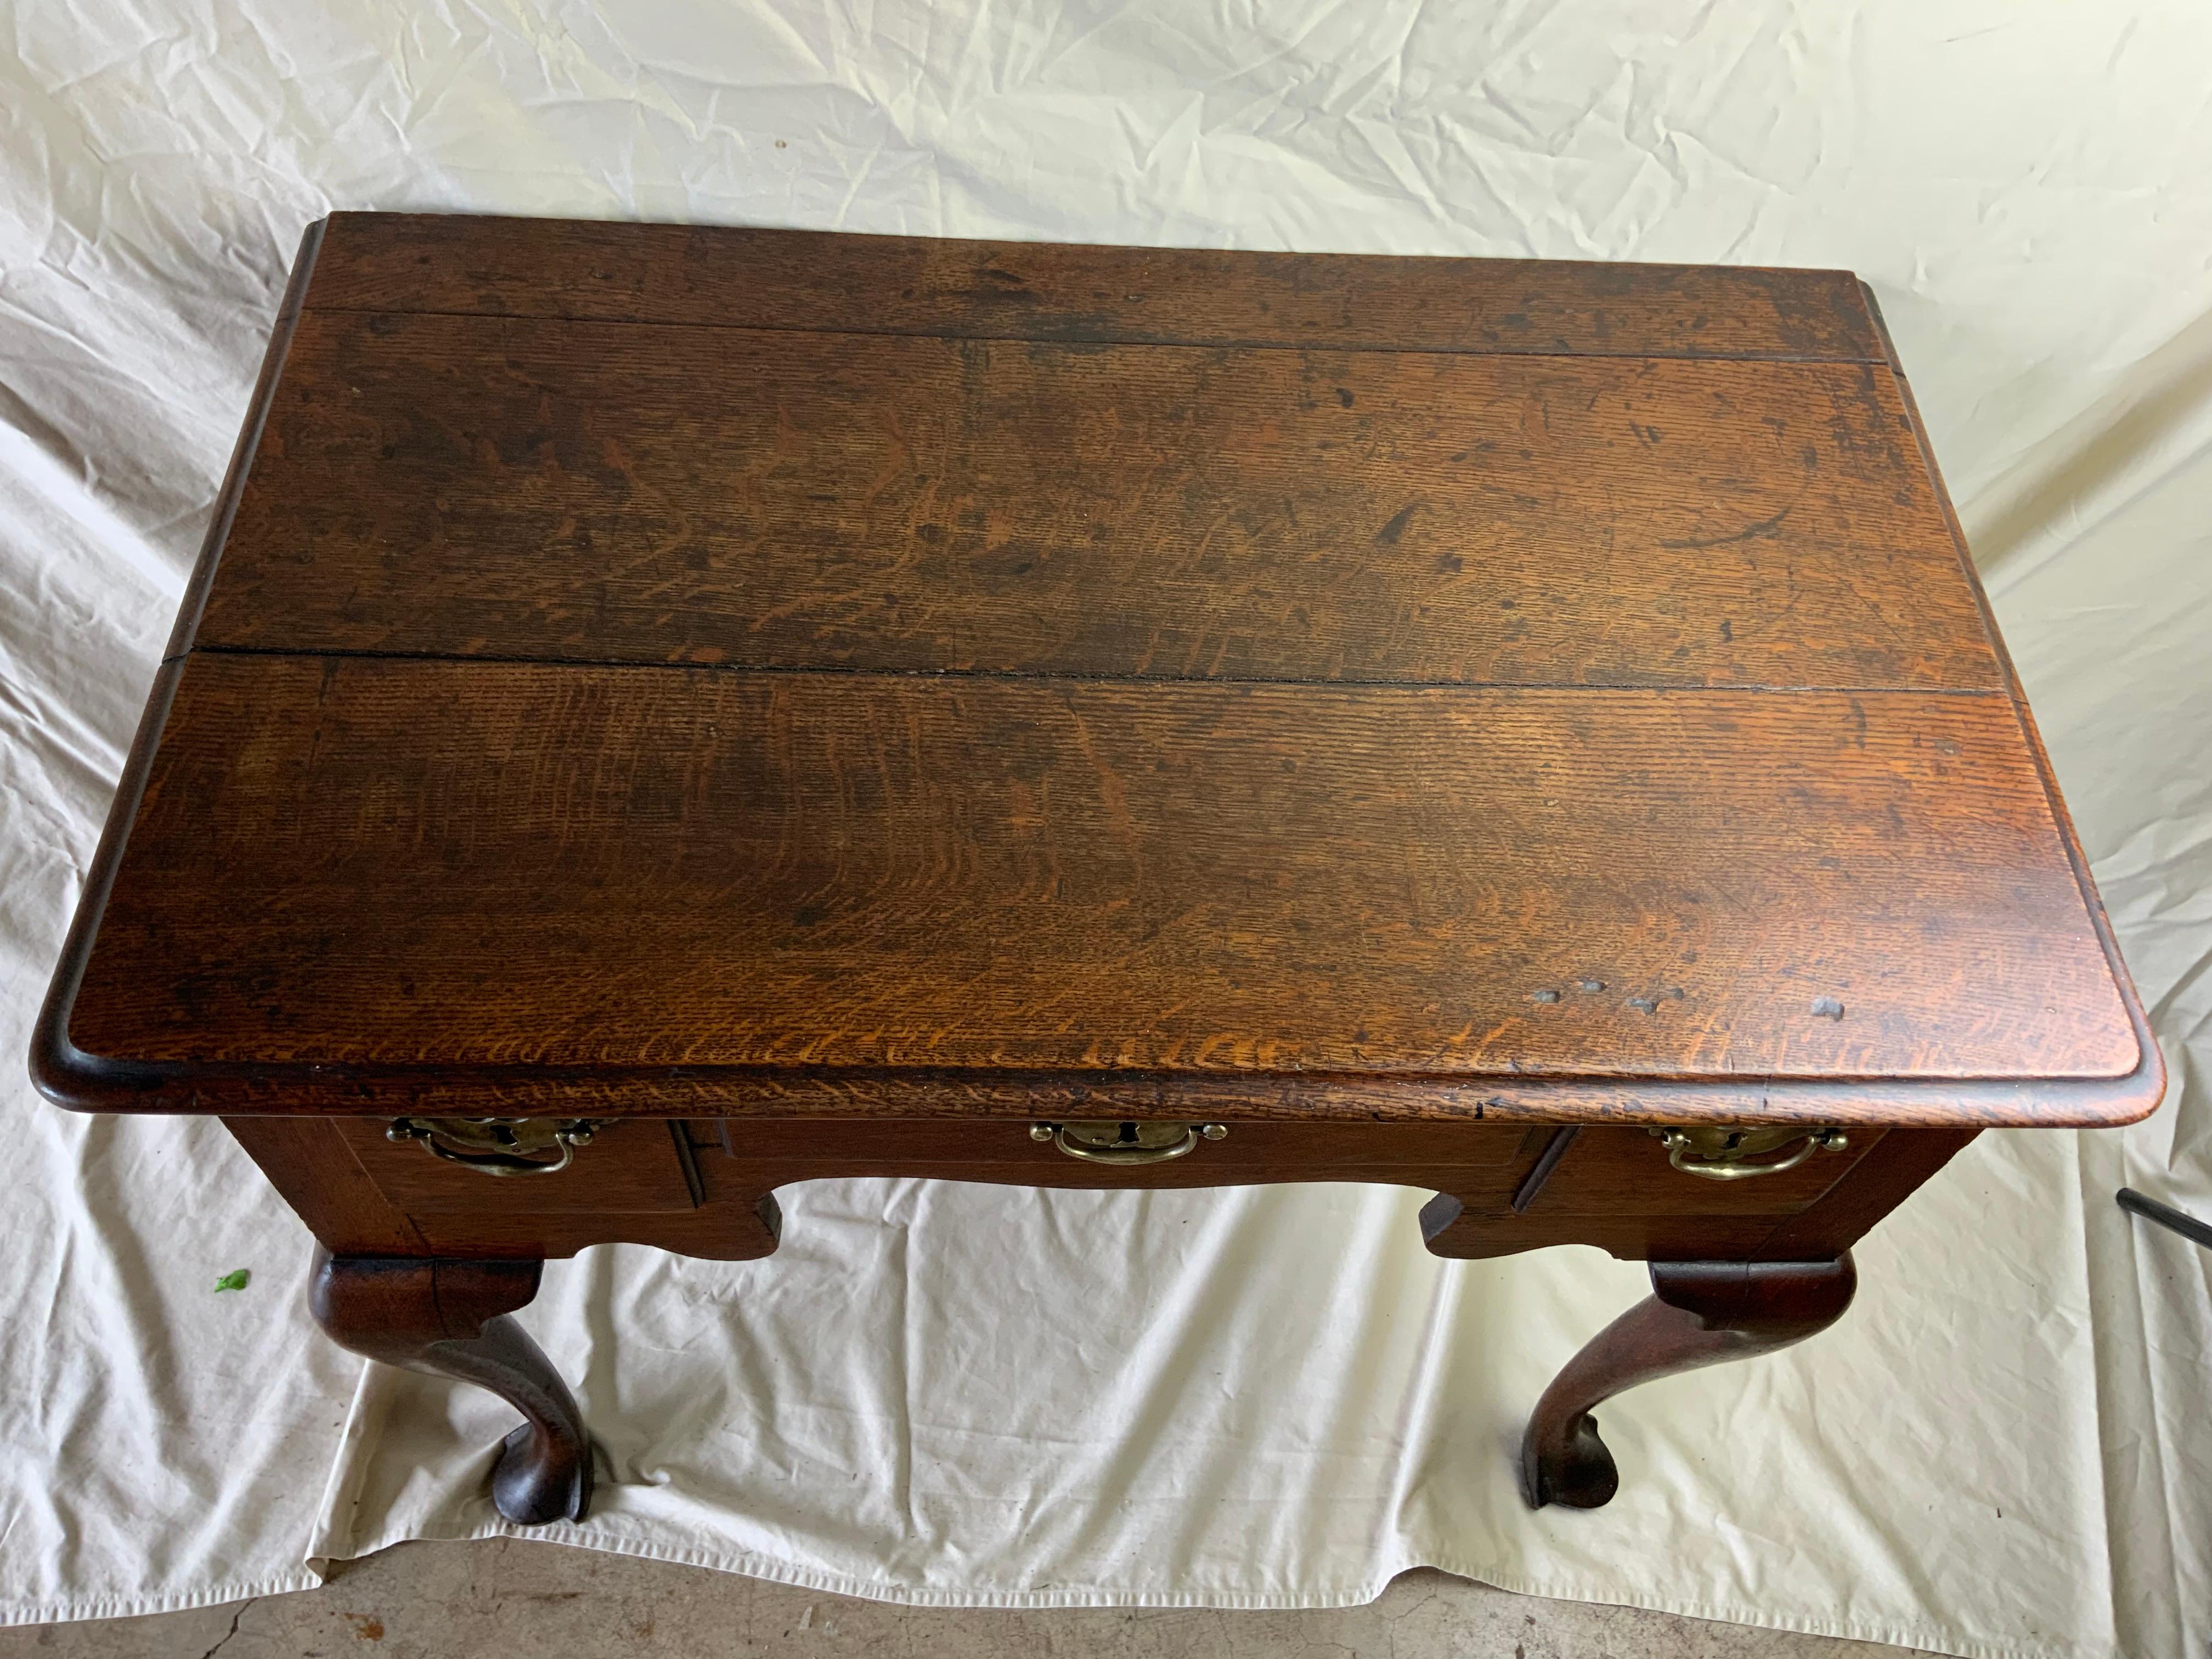 This Fine Country late 18th Century Georgian Oak Antique Low Boy dates from ca. 1790 and comes with wonderful charm and character.  This George III Period Oak Antique Low Boy has a beautifully moulded top above three drawers with molded edges and